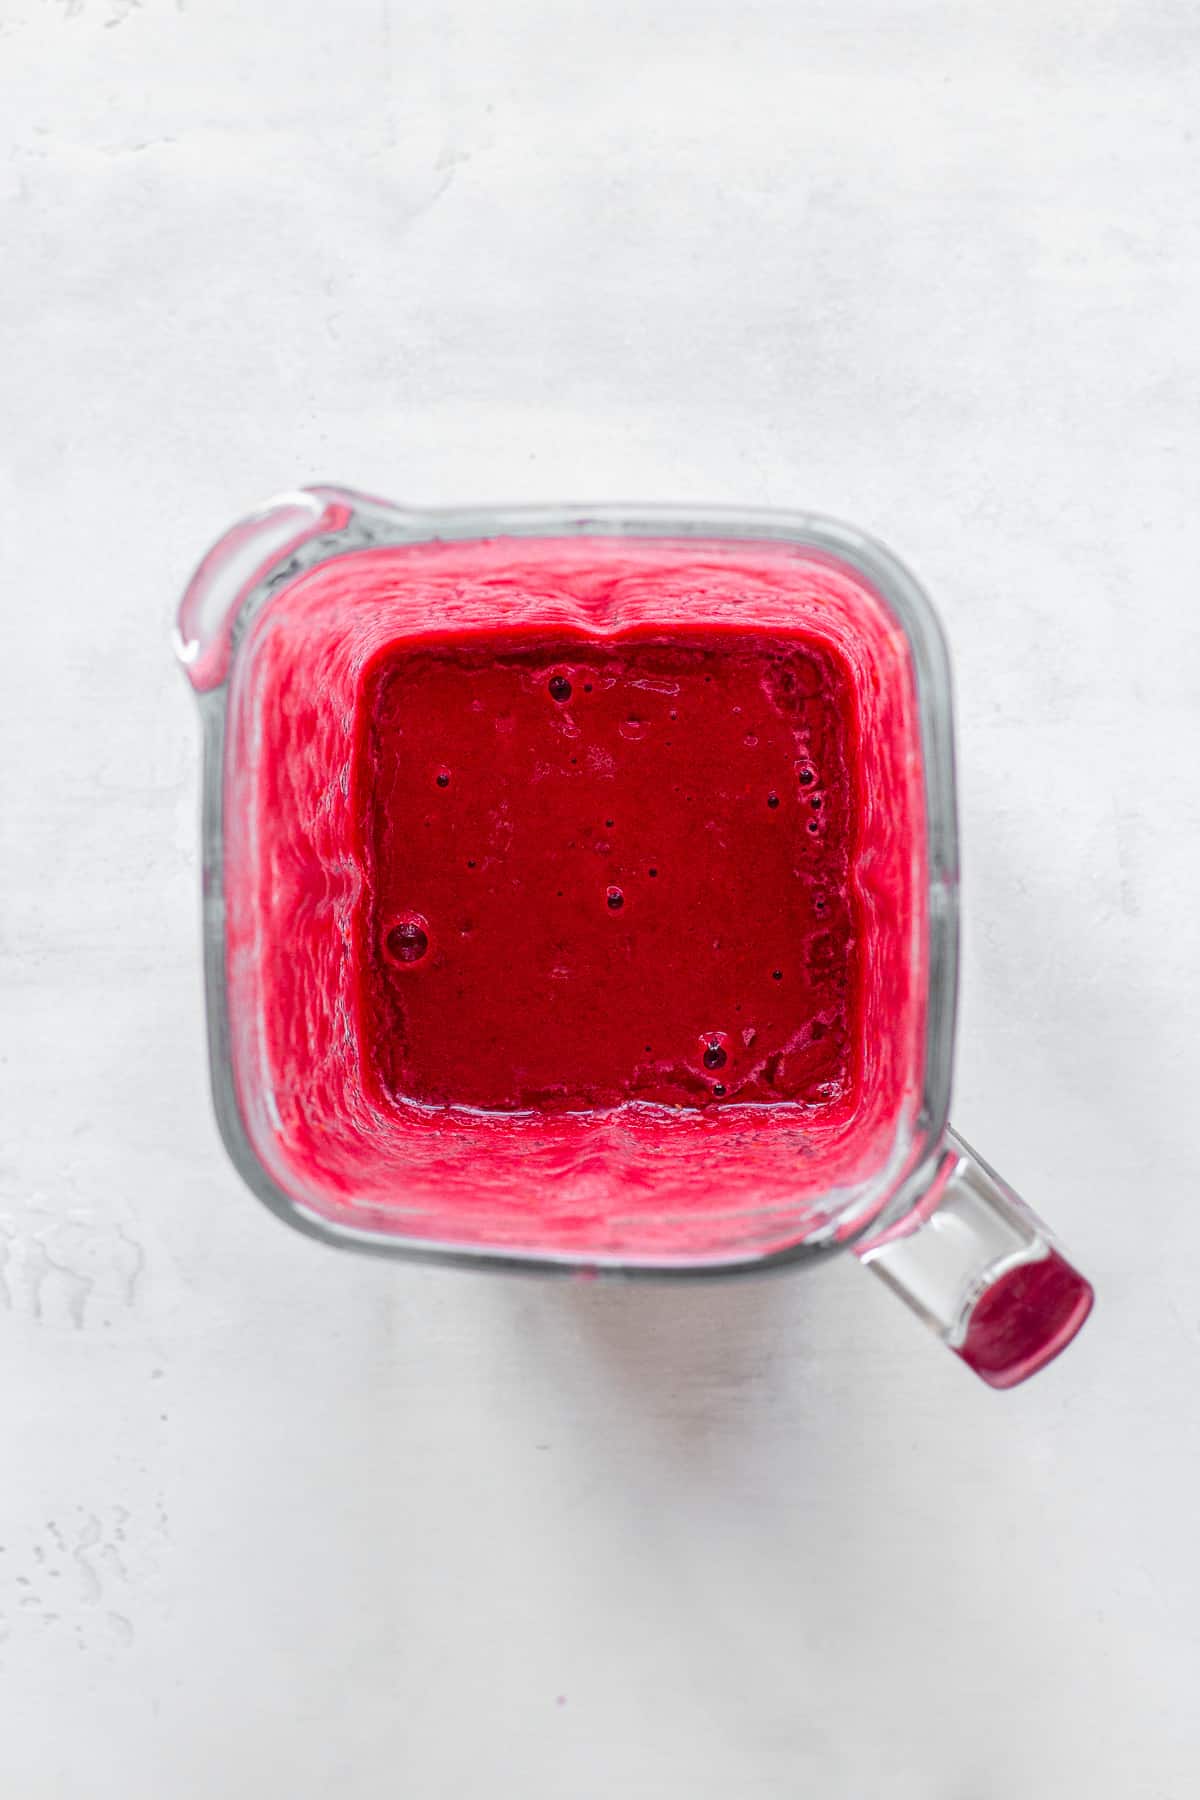 Top view of a blended pink cranberry and beetroot smoothie.